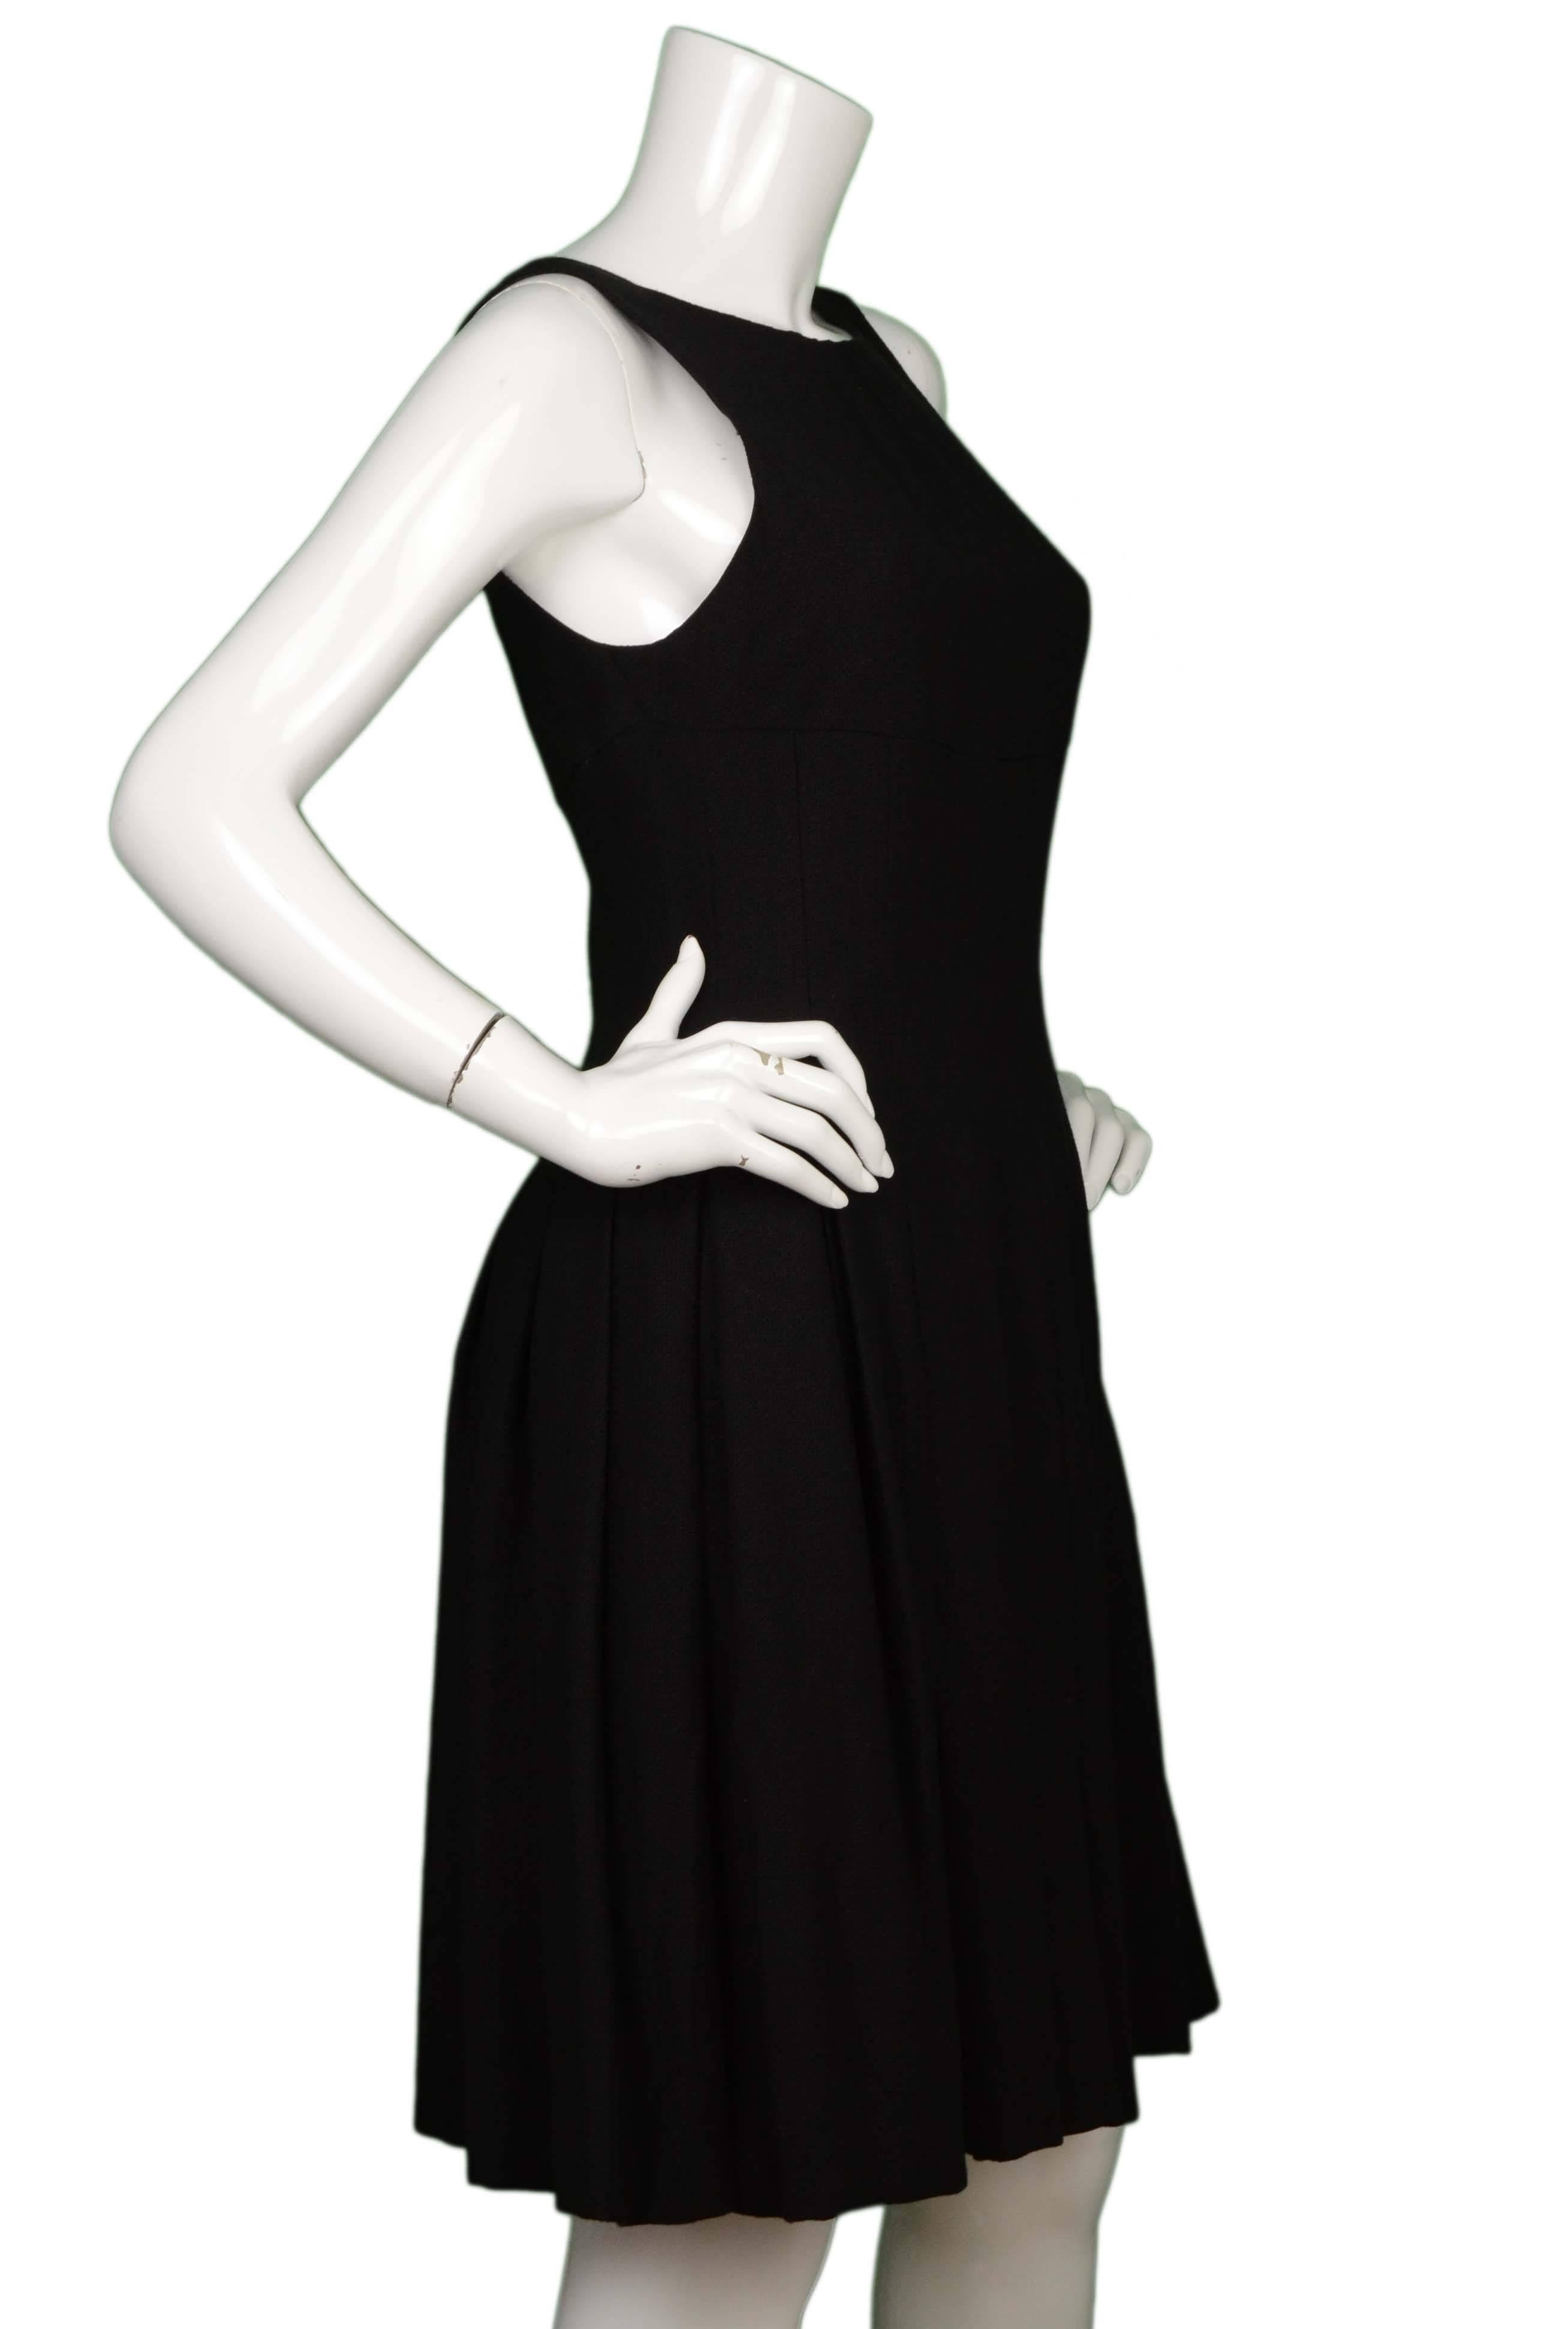 Chanel Black Wool Sleeveless Pleated Dress 

Made In: France
Year of Production: 2007
Color: Black
Composition: 53% wool, 31% silk, 16% rayon
Lining: Black, 100% silk
Closure/Opening: Back center zip up
Exterior Pockets: None
Interior